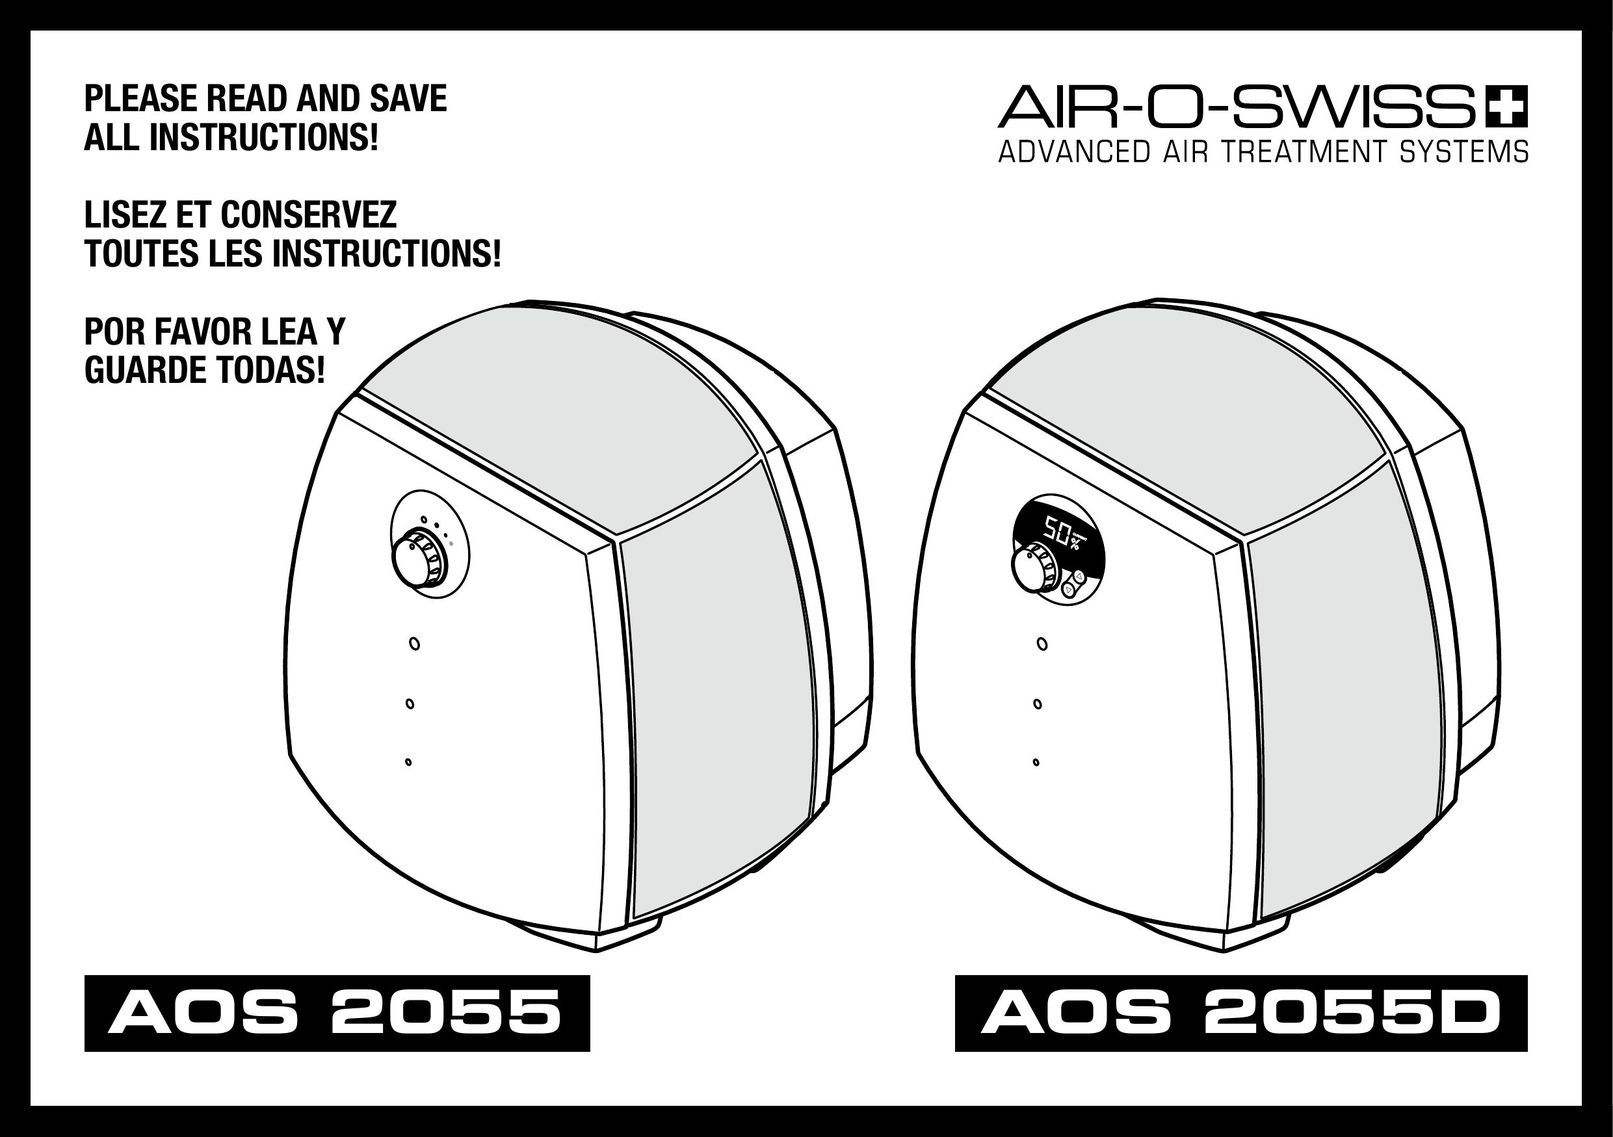 Air-O-Swiss AOS 2055 Air Cleaner User Manual (Page 1)